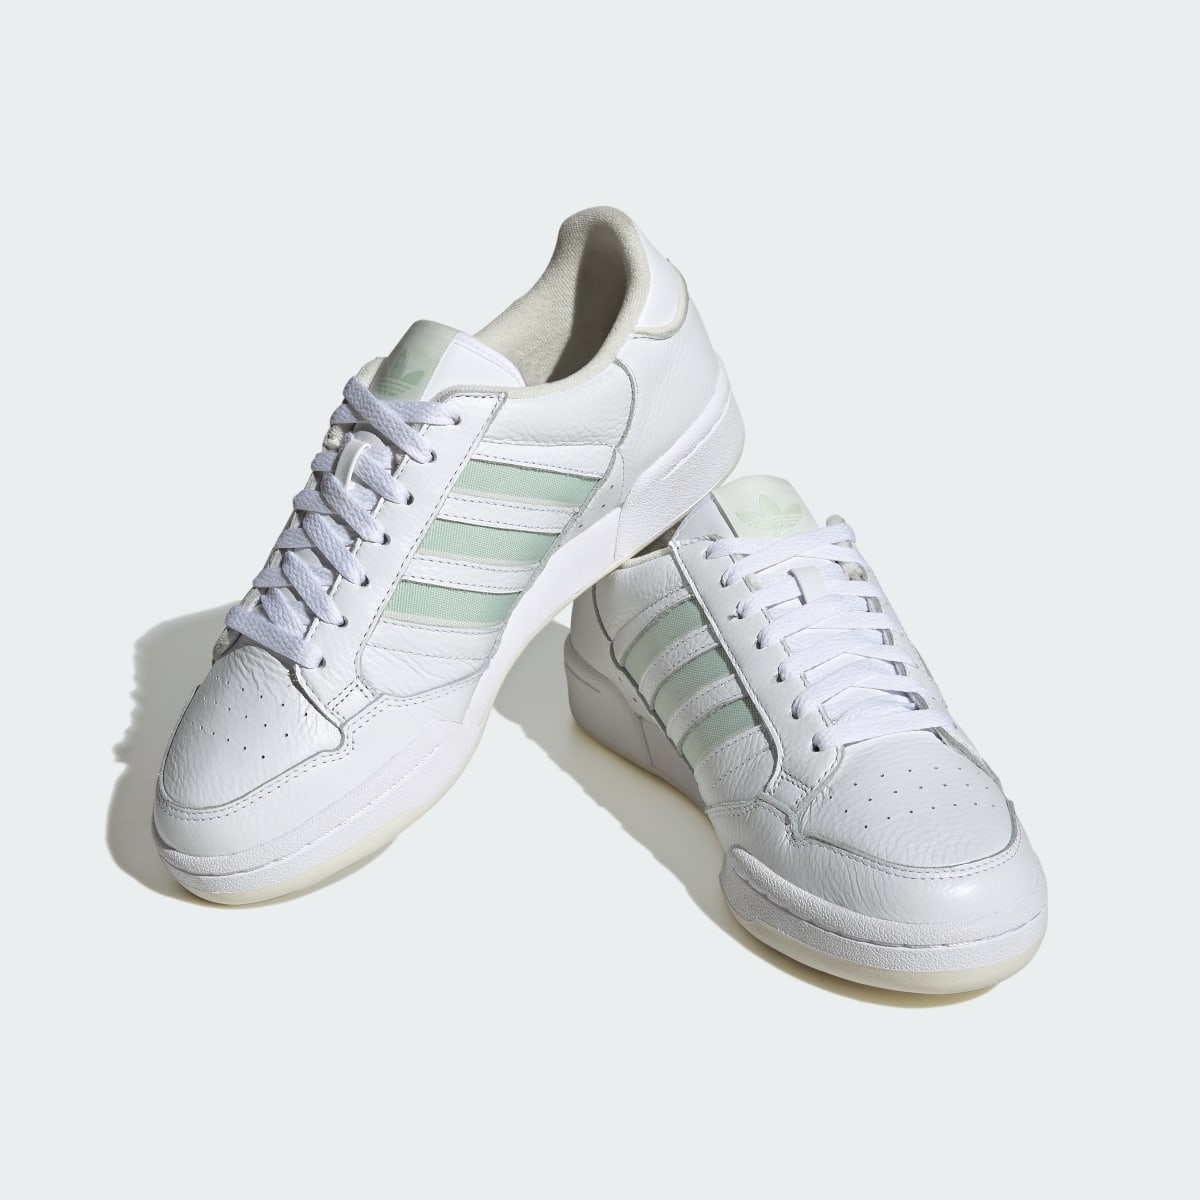 Adidas Continental 80 Stripes Shoes. 5